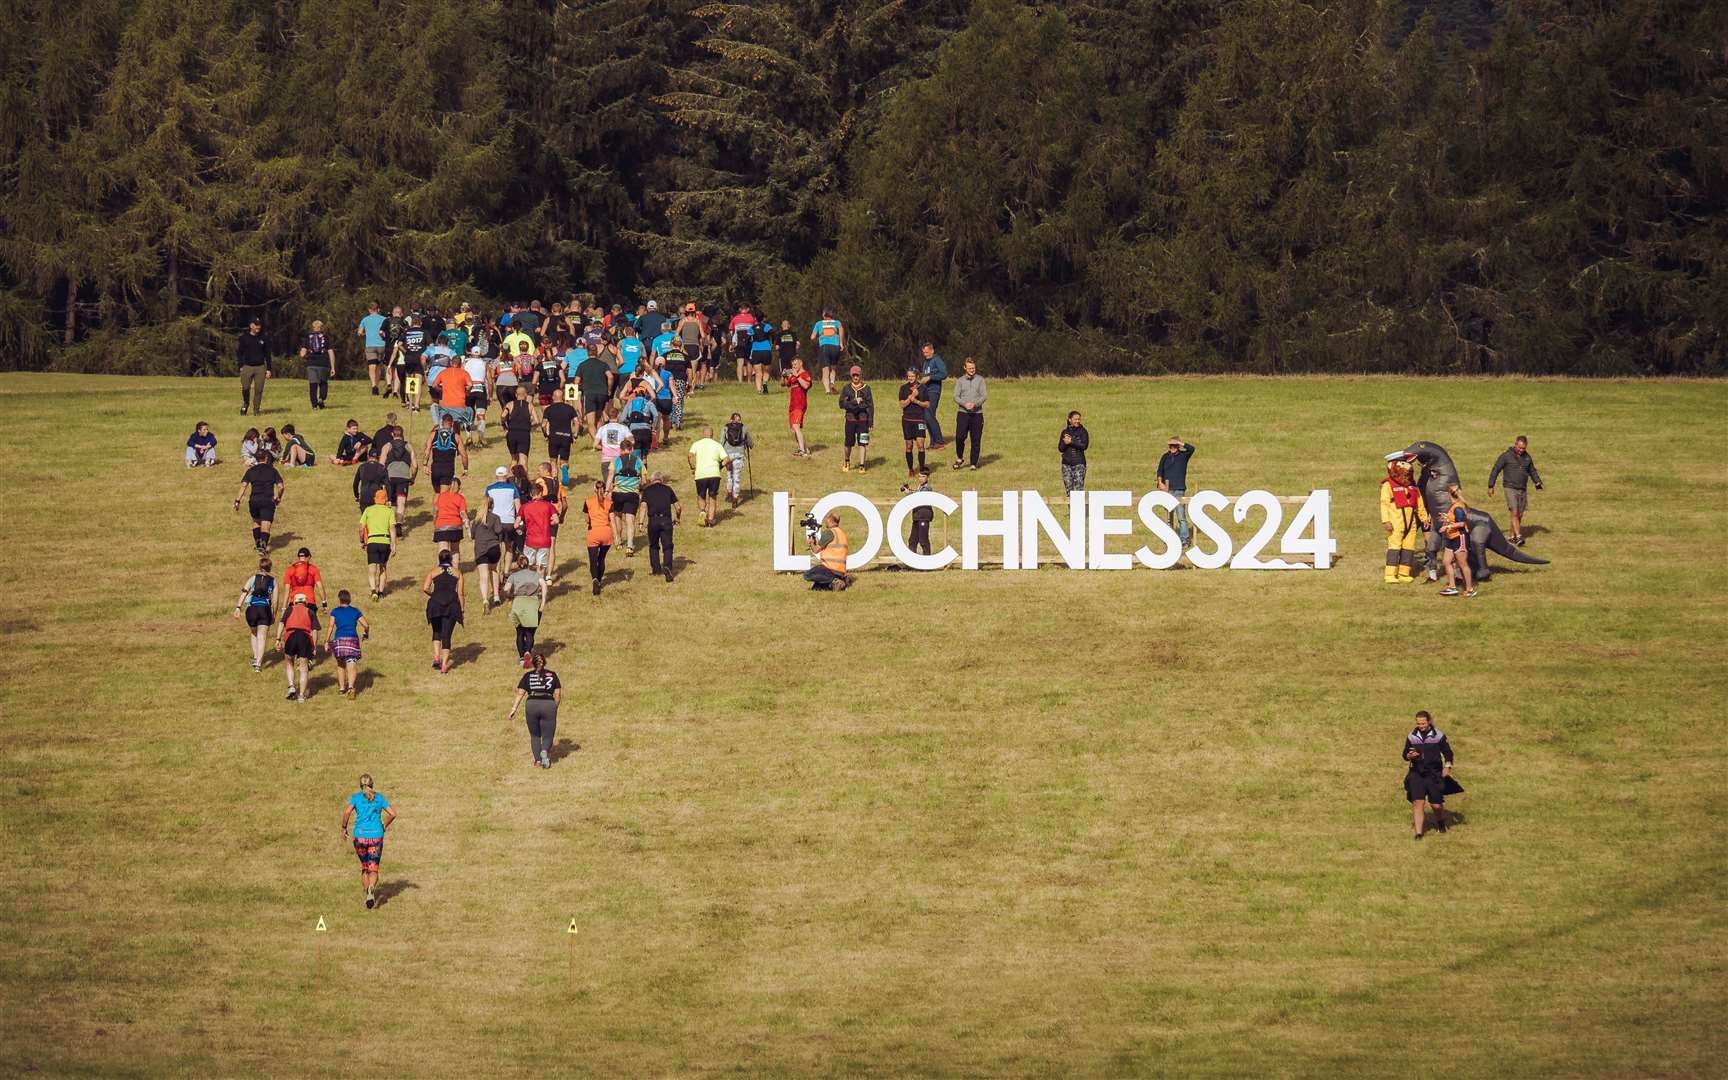 The first Loch Ness 24 event took place in 2022.